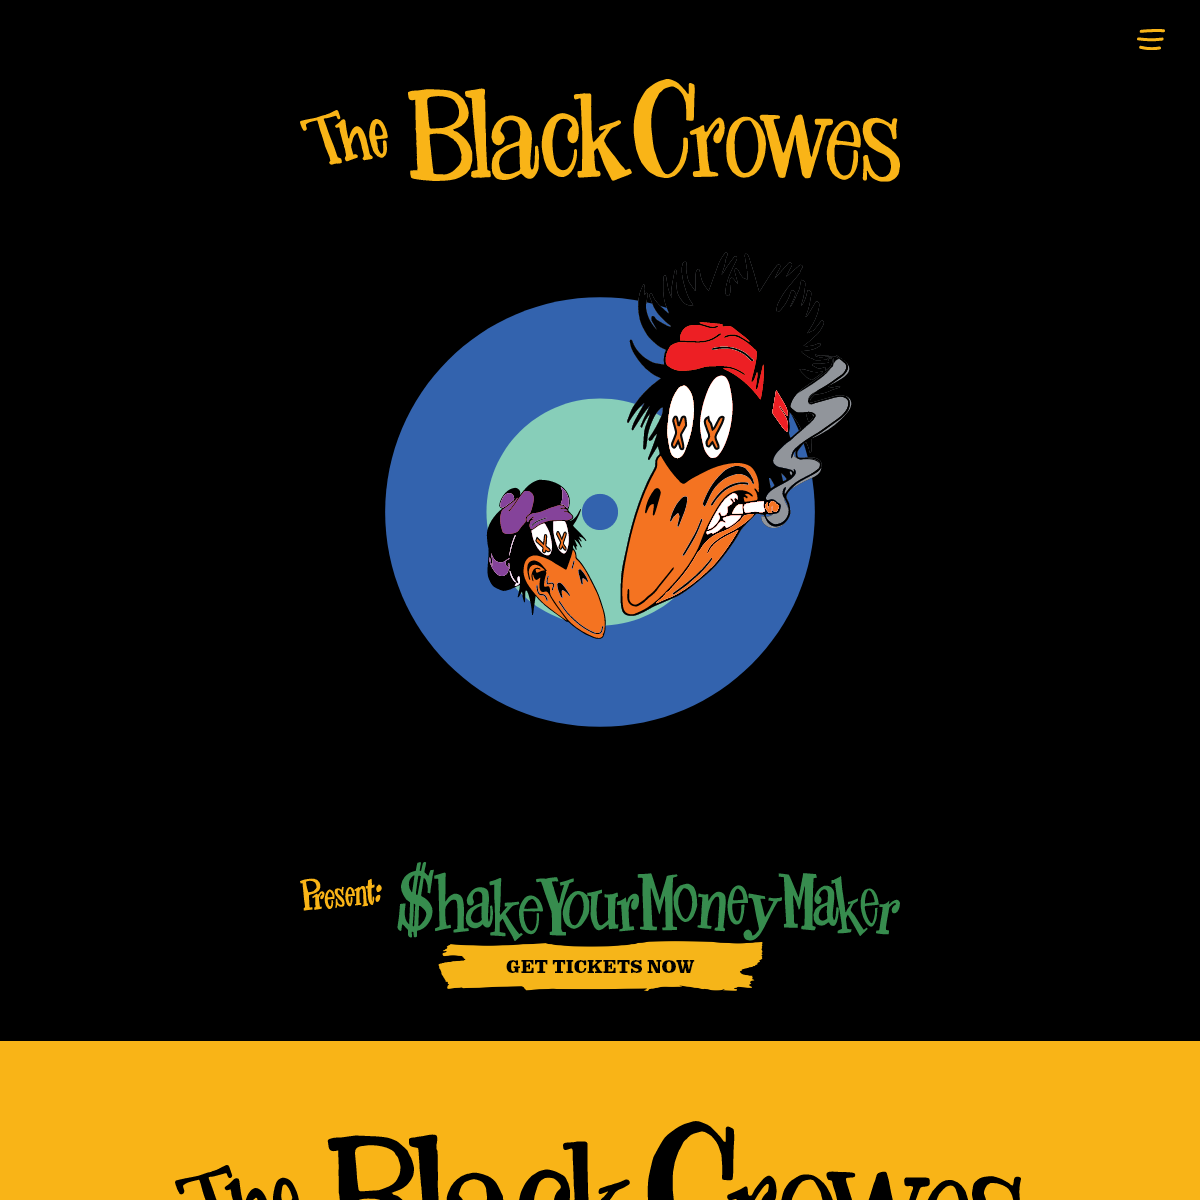 A complete backup of blackcrowes.com